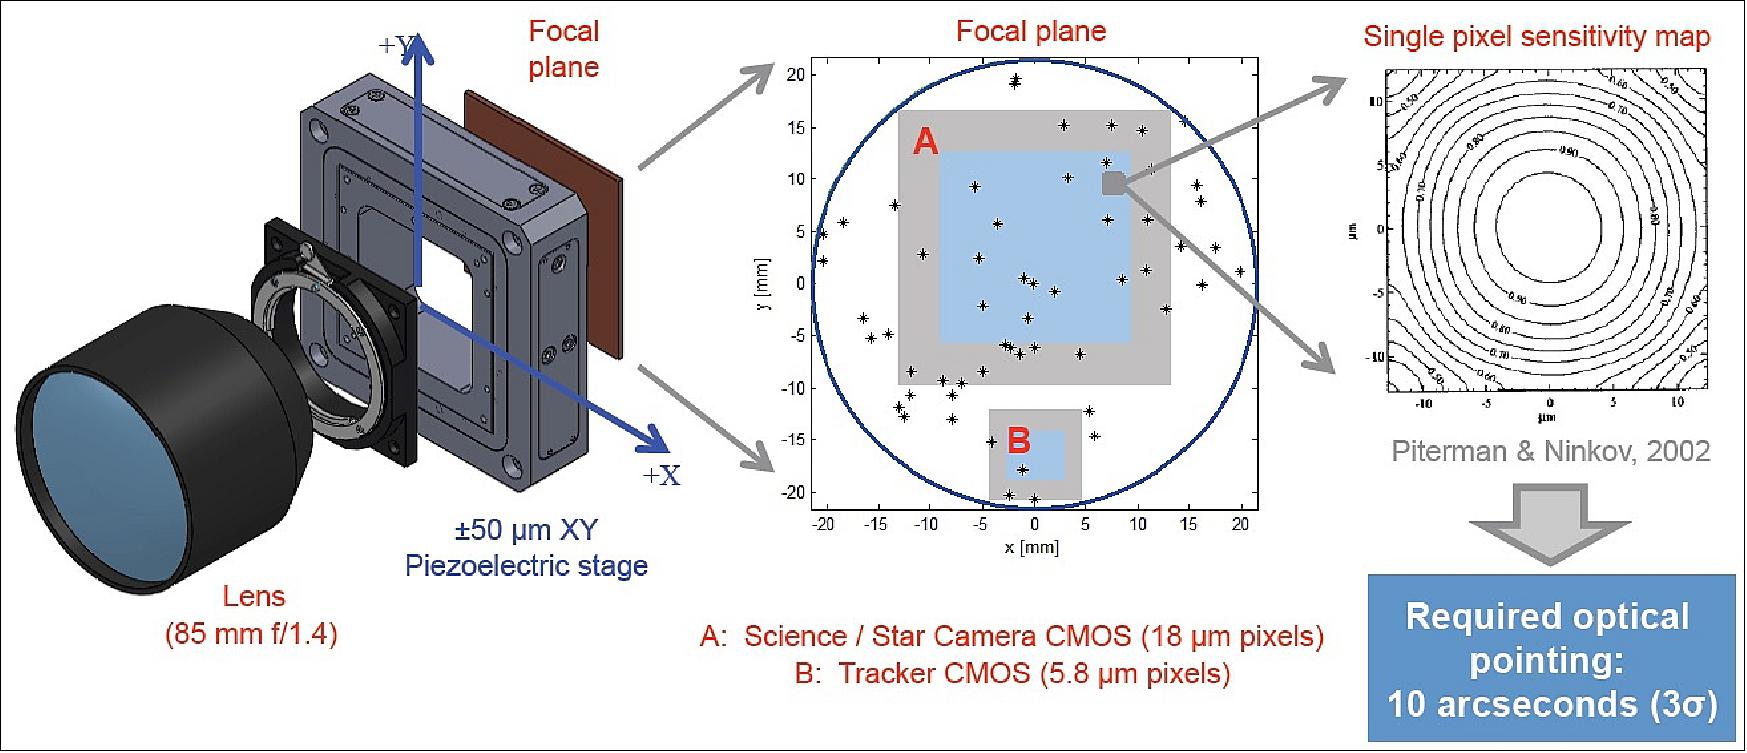 Figure 20: Illustration of the ASTERIA imager architecture (image credit: NASA, MIT)